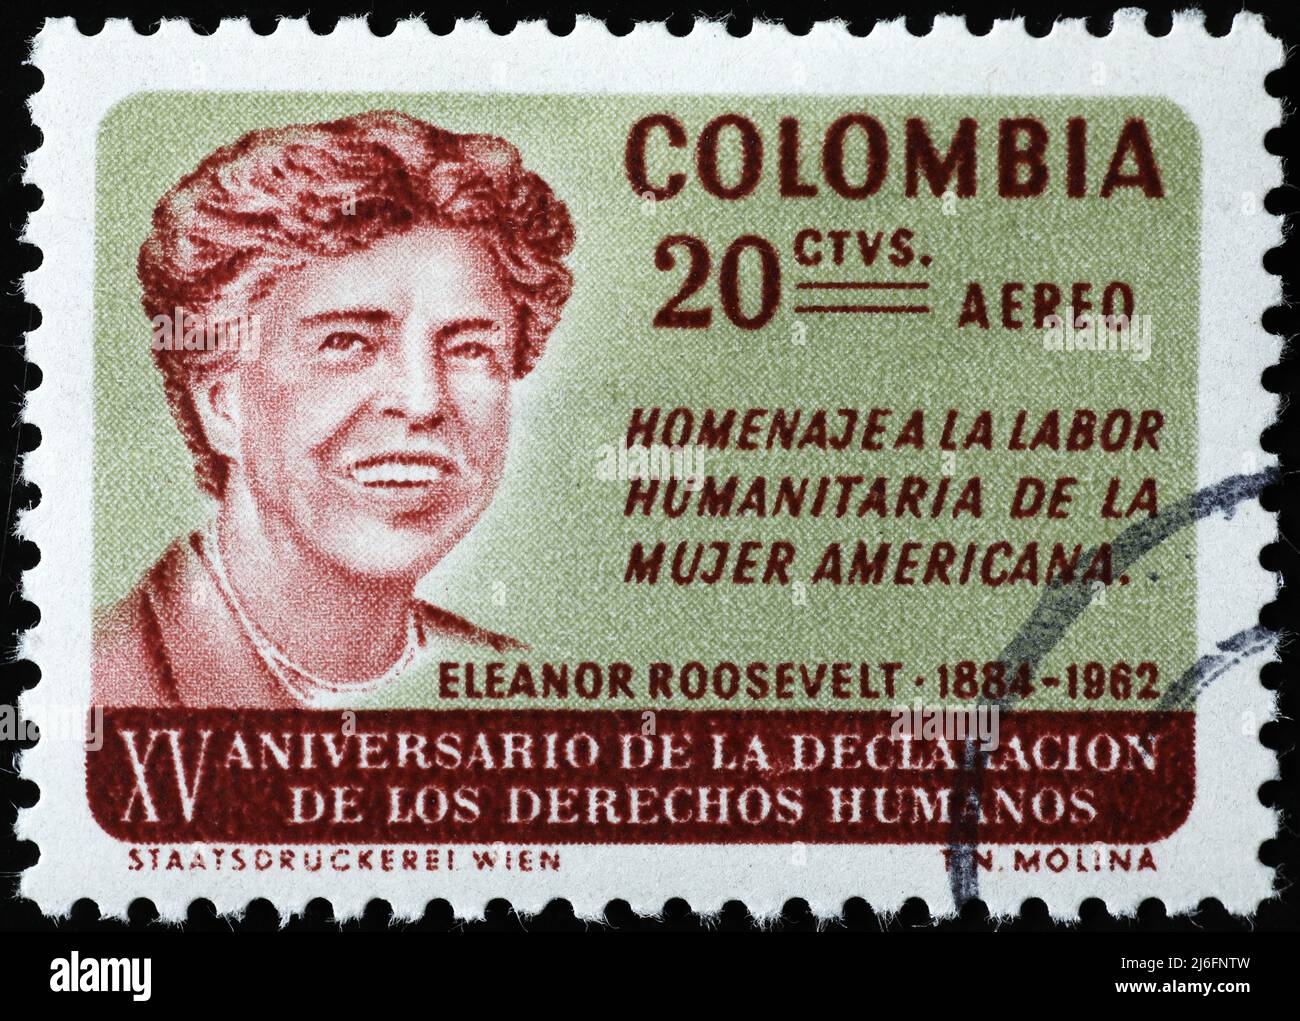 Eleanor Roosevelt on old stamp from Colombia Stock Photo